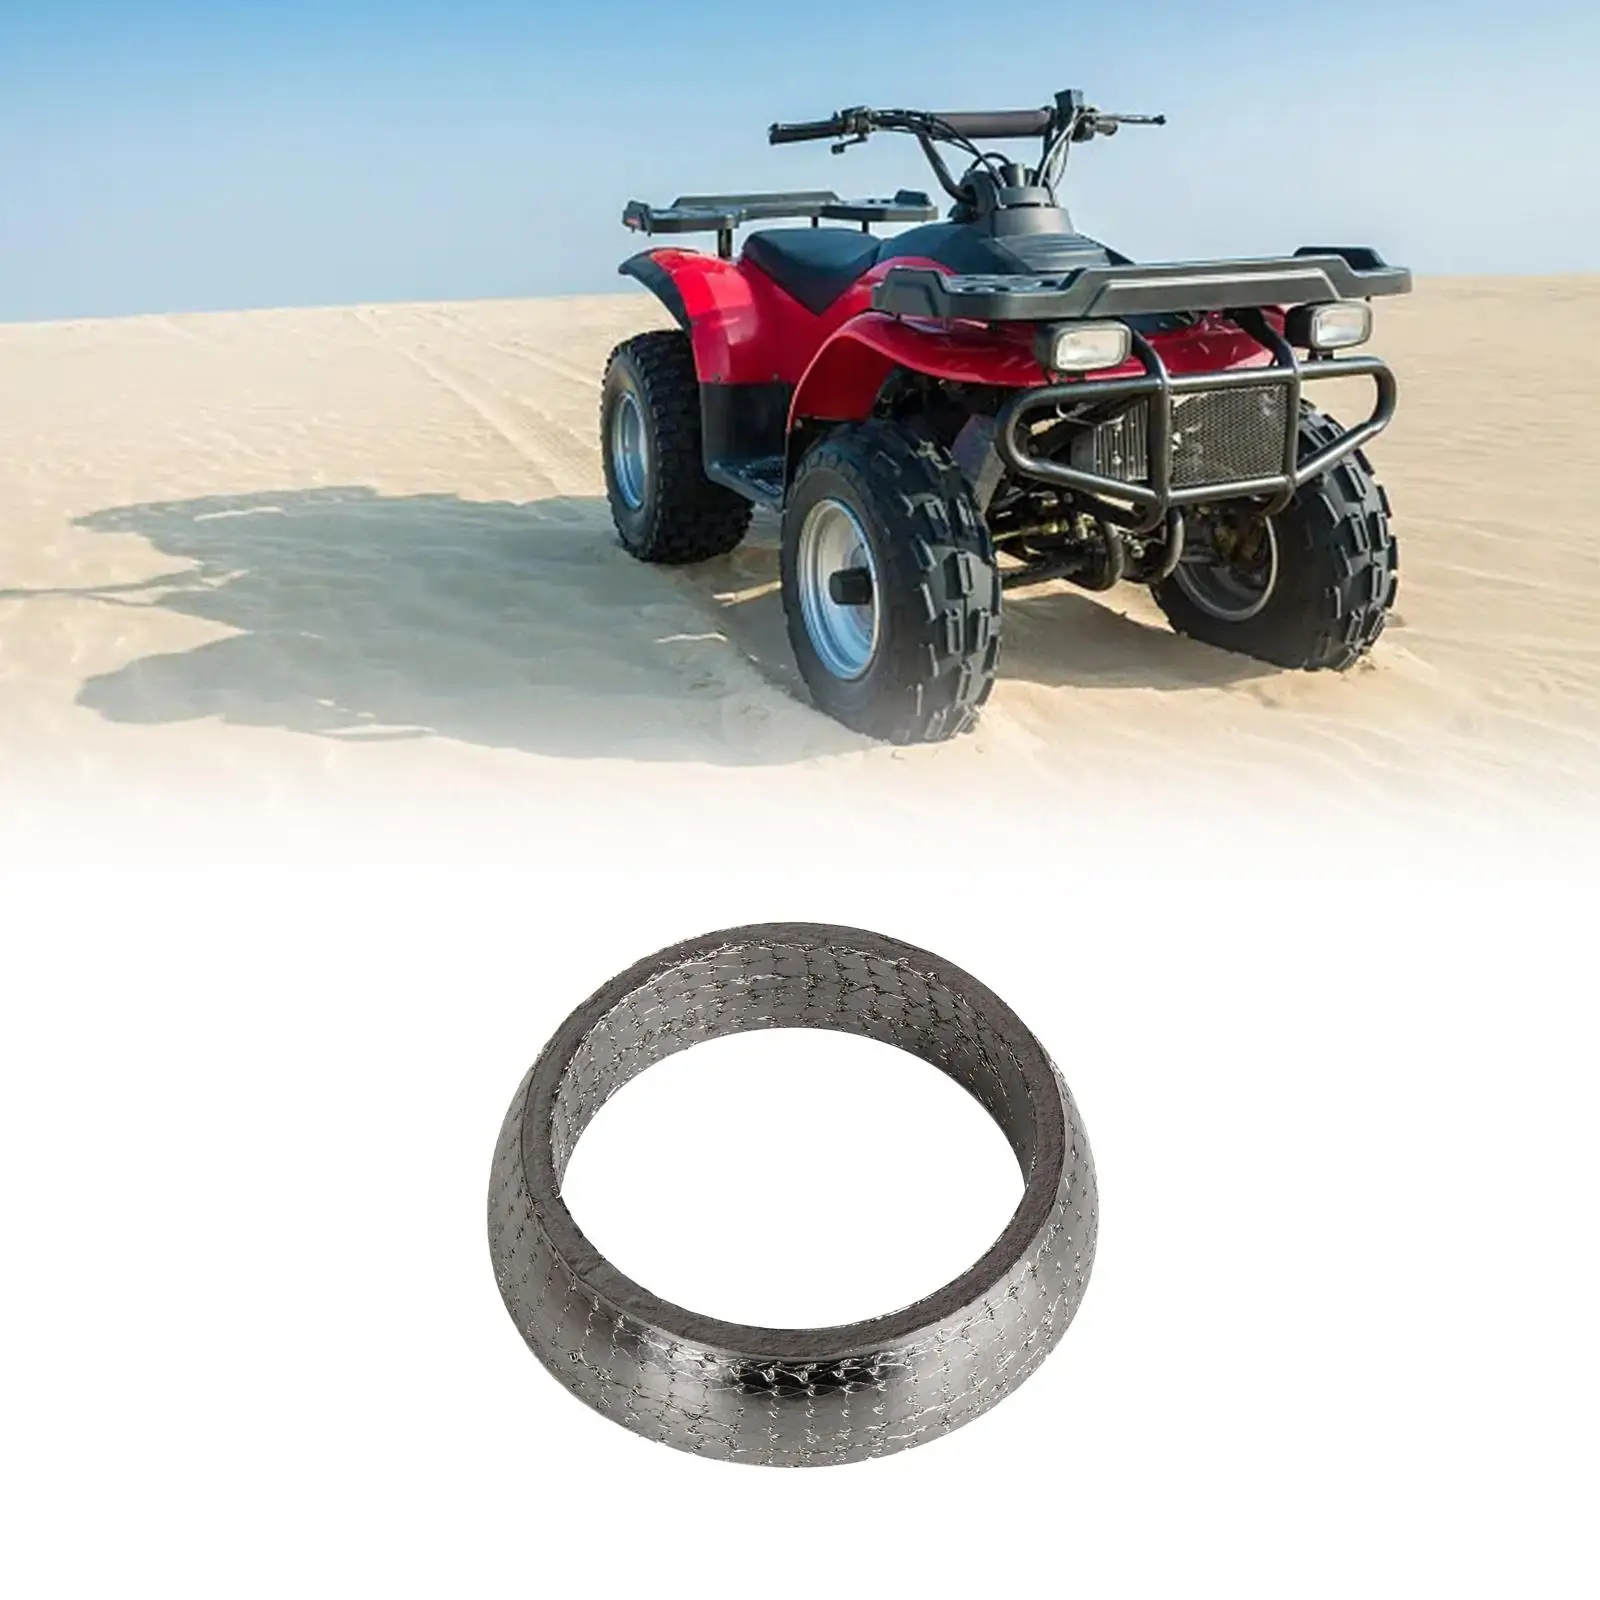 Graphite Gasket Stainless Steel Pipe Accessory Universal Replace Parts 1.49in Donut Style for Cfmoto CF800 CF800cc ATV UTV